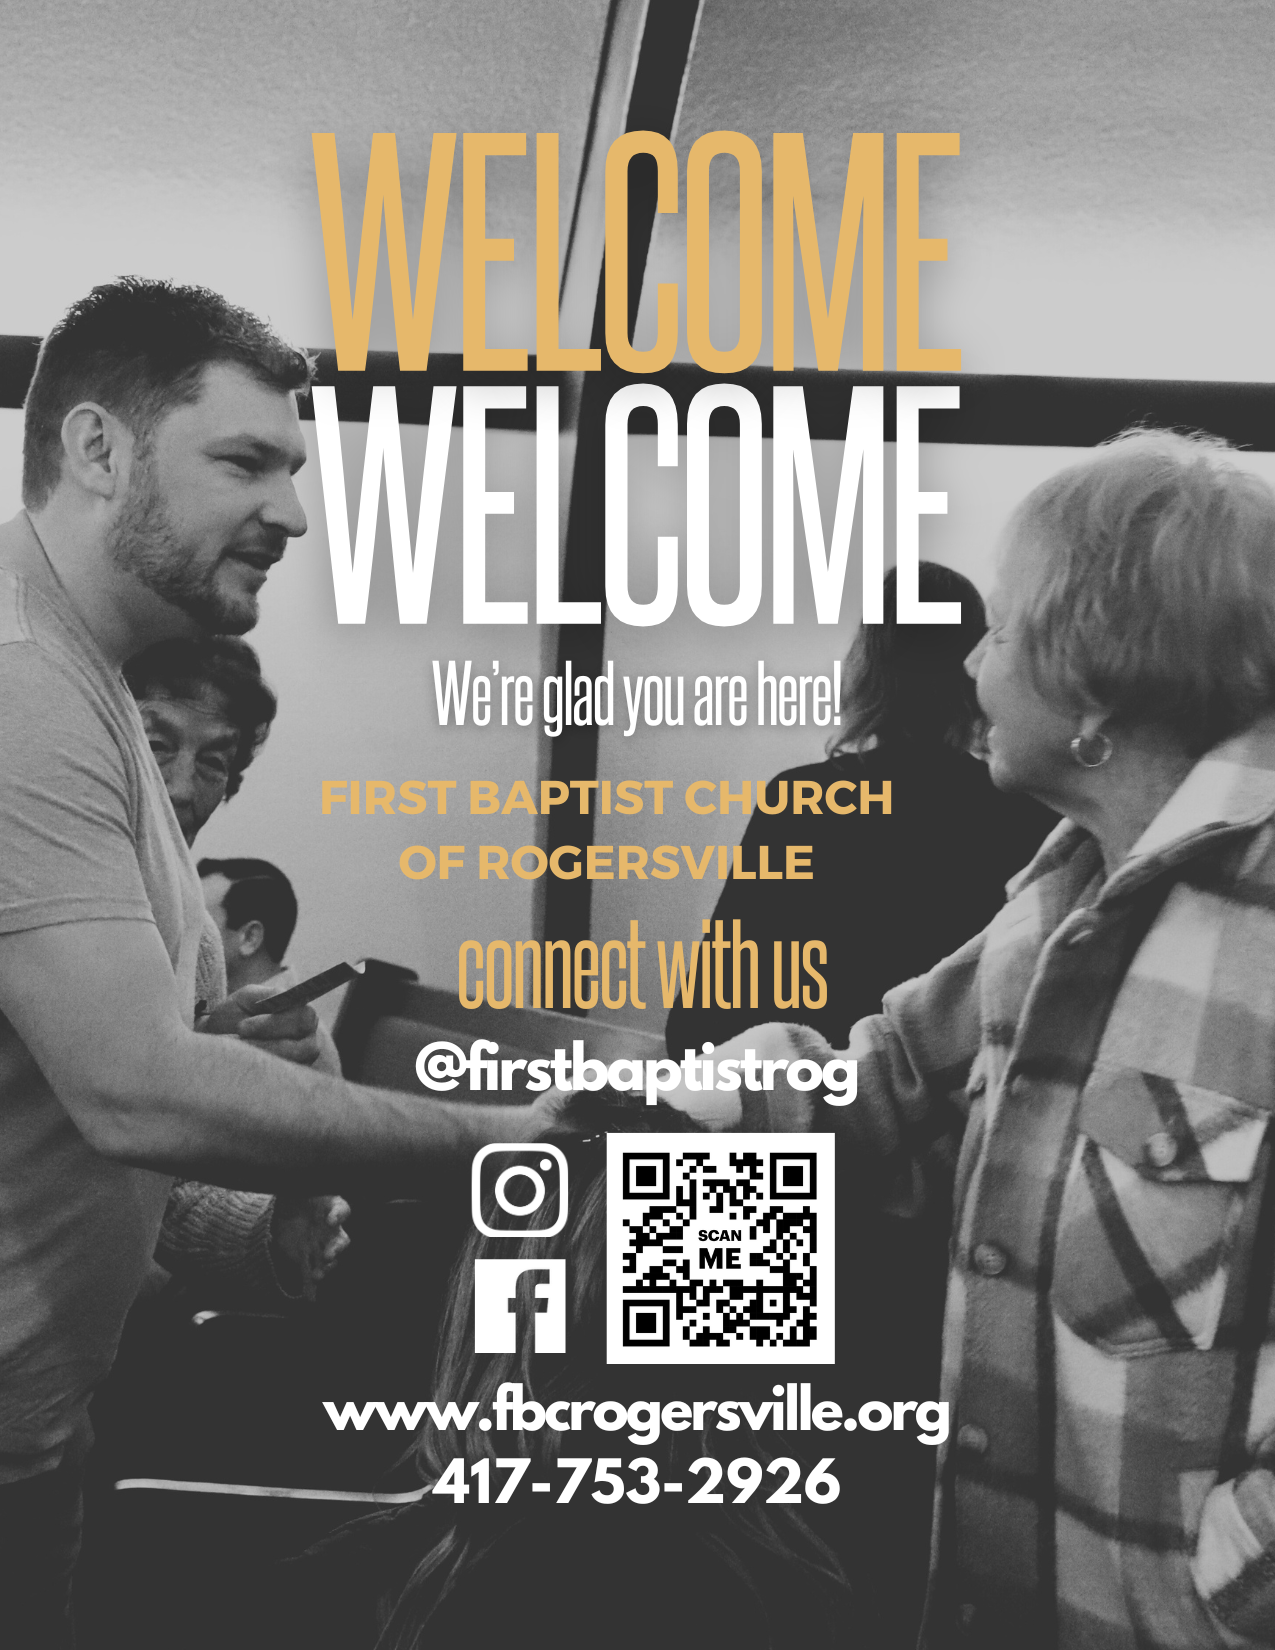 Connection Card. Welcome to the First Baptist Church of Rogersville. Let's Connect!